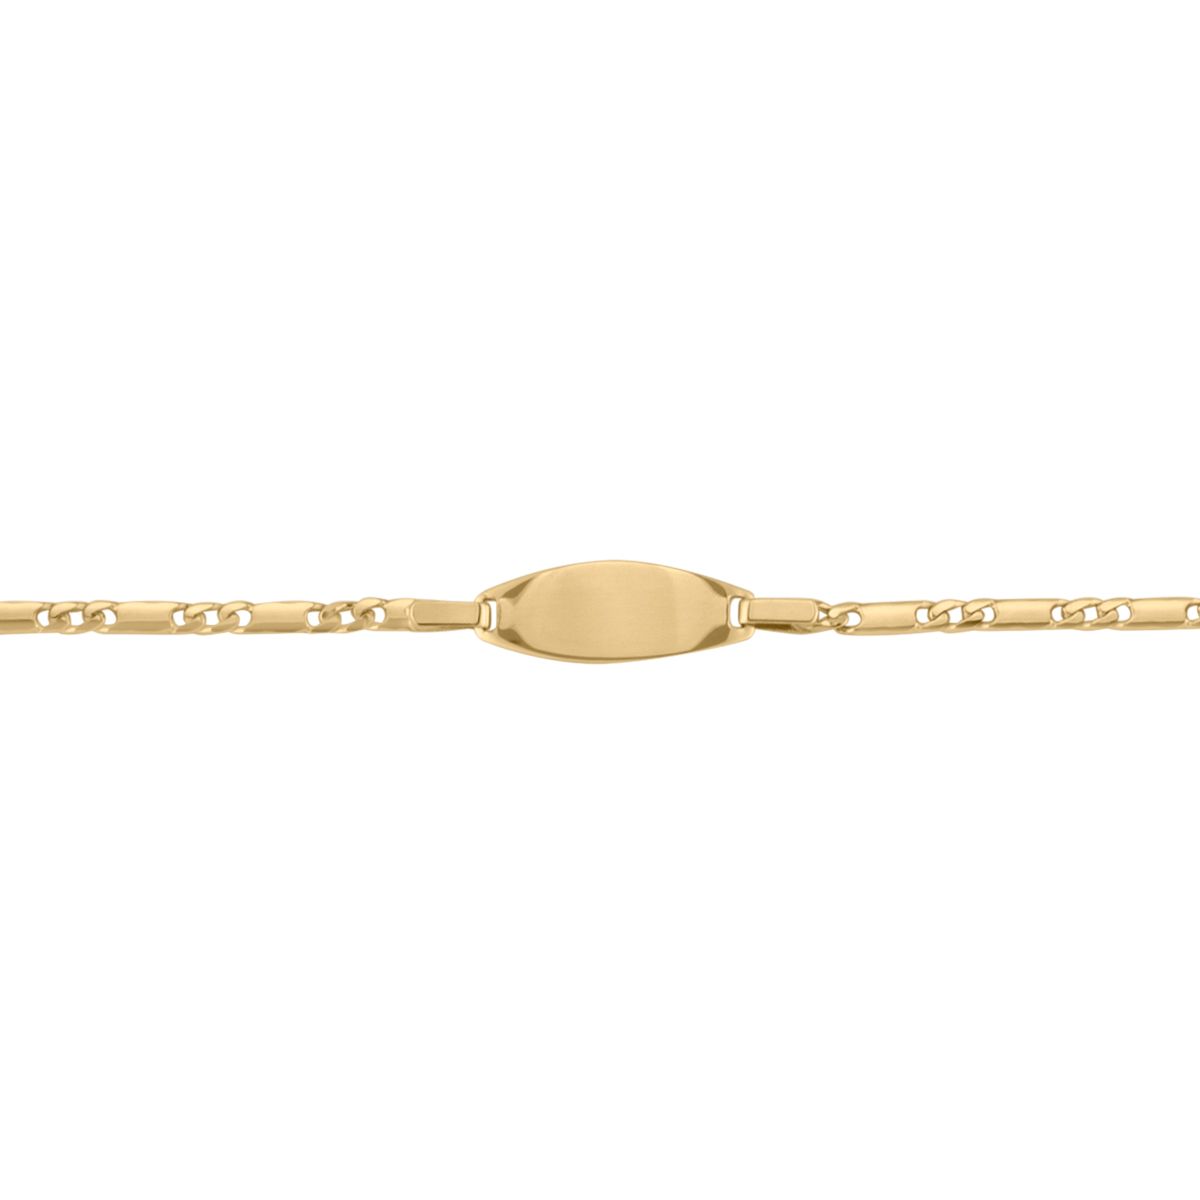 B0103, Gold Bracelet, Engravable ID, Yellow or White Gold